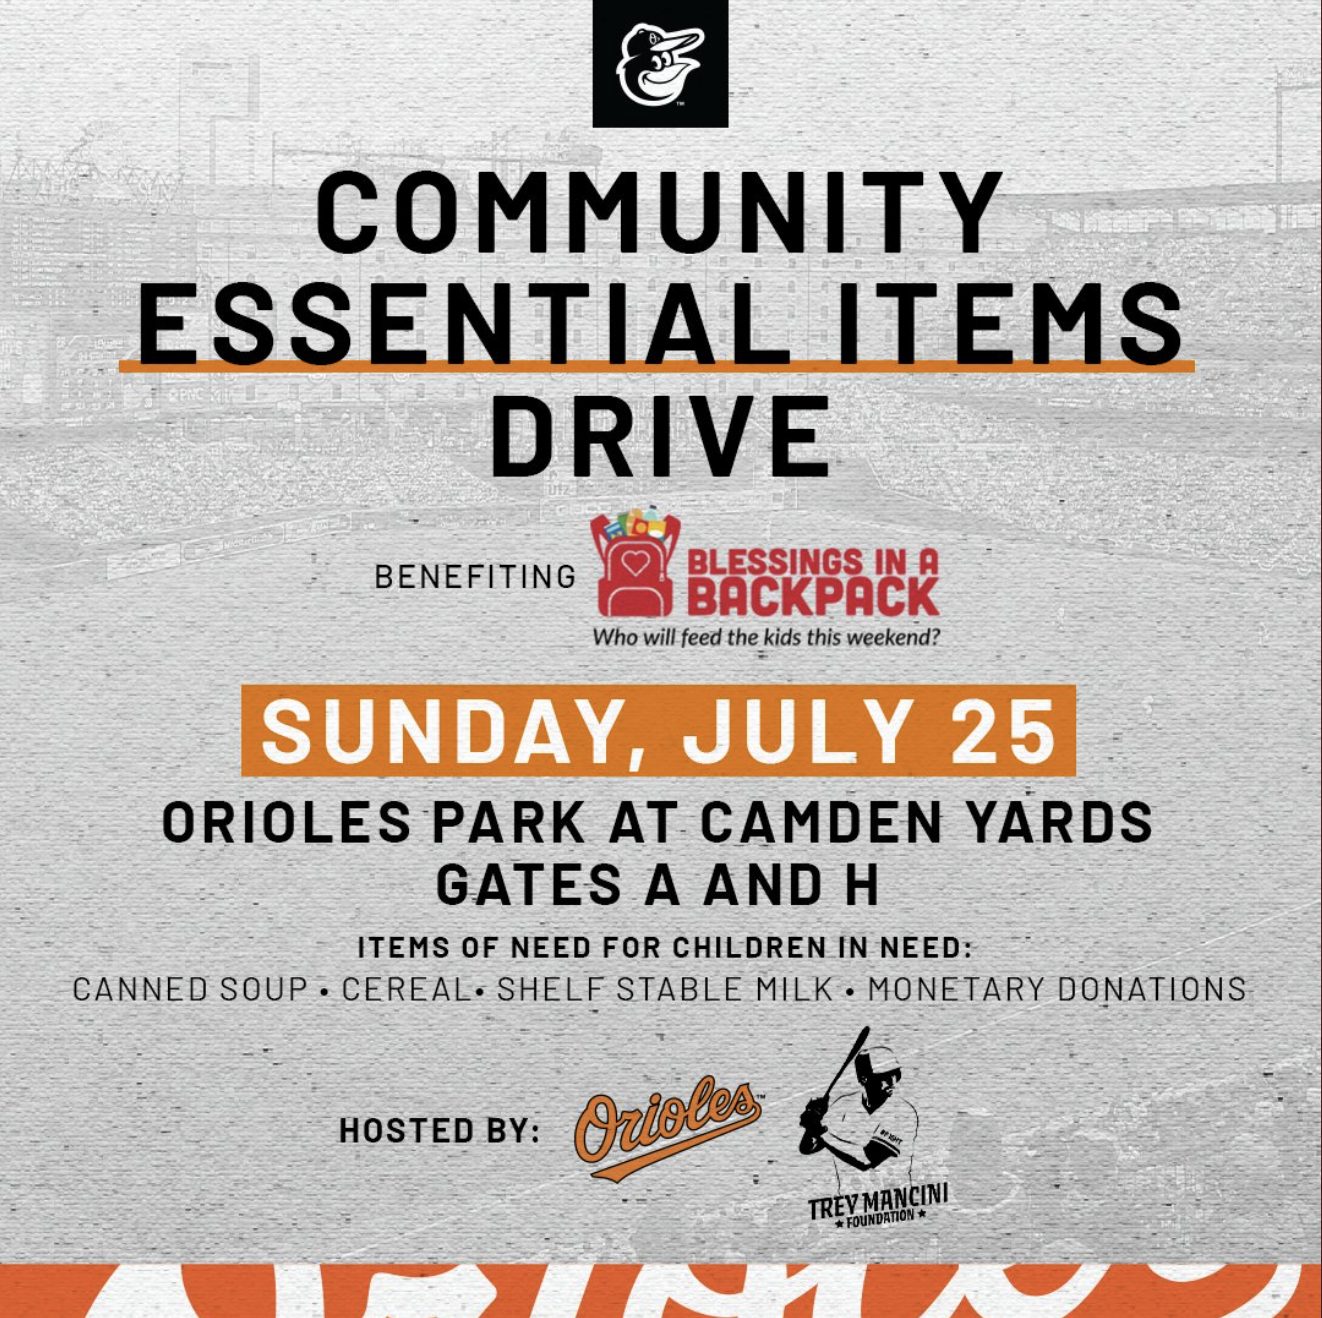 Community essential items drive hosted by the Baltimore Orioles and Trey Mancini Foundation